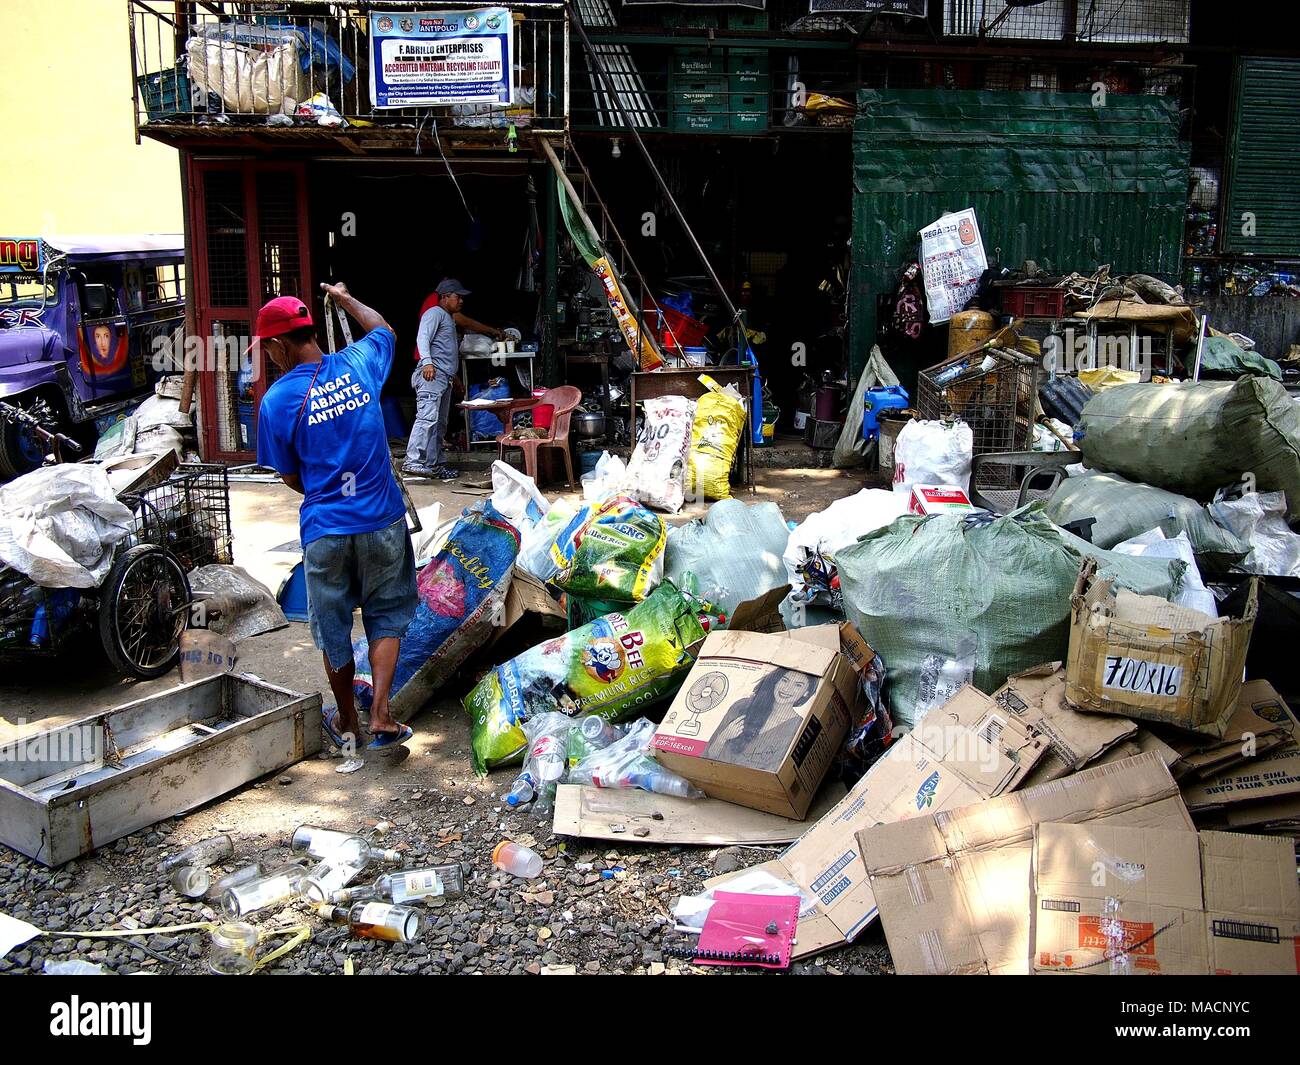 ANTIPOLO CITY, PHILIPPINES - MARCH 28, 2018: Workers of a junk shop or materials recovery facility sort through all kinds of recyclable materials. Stock Photo